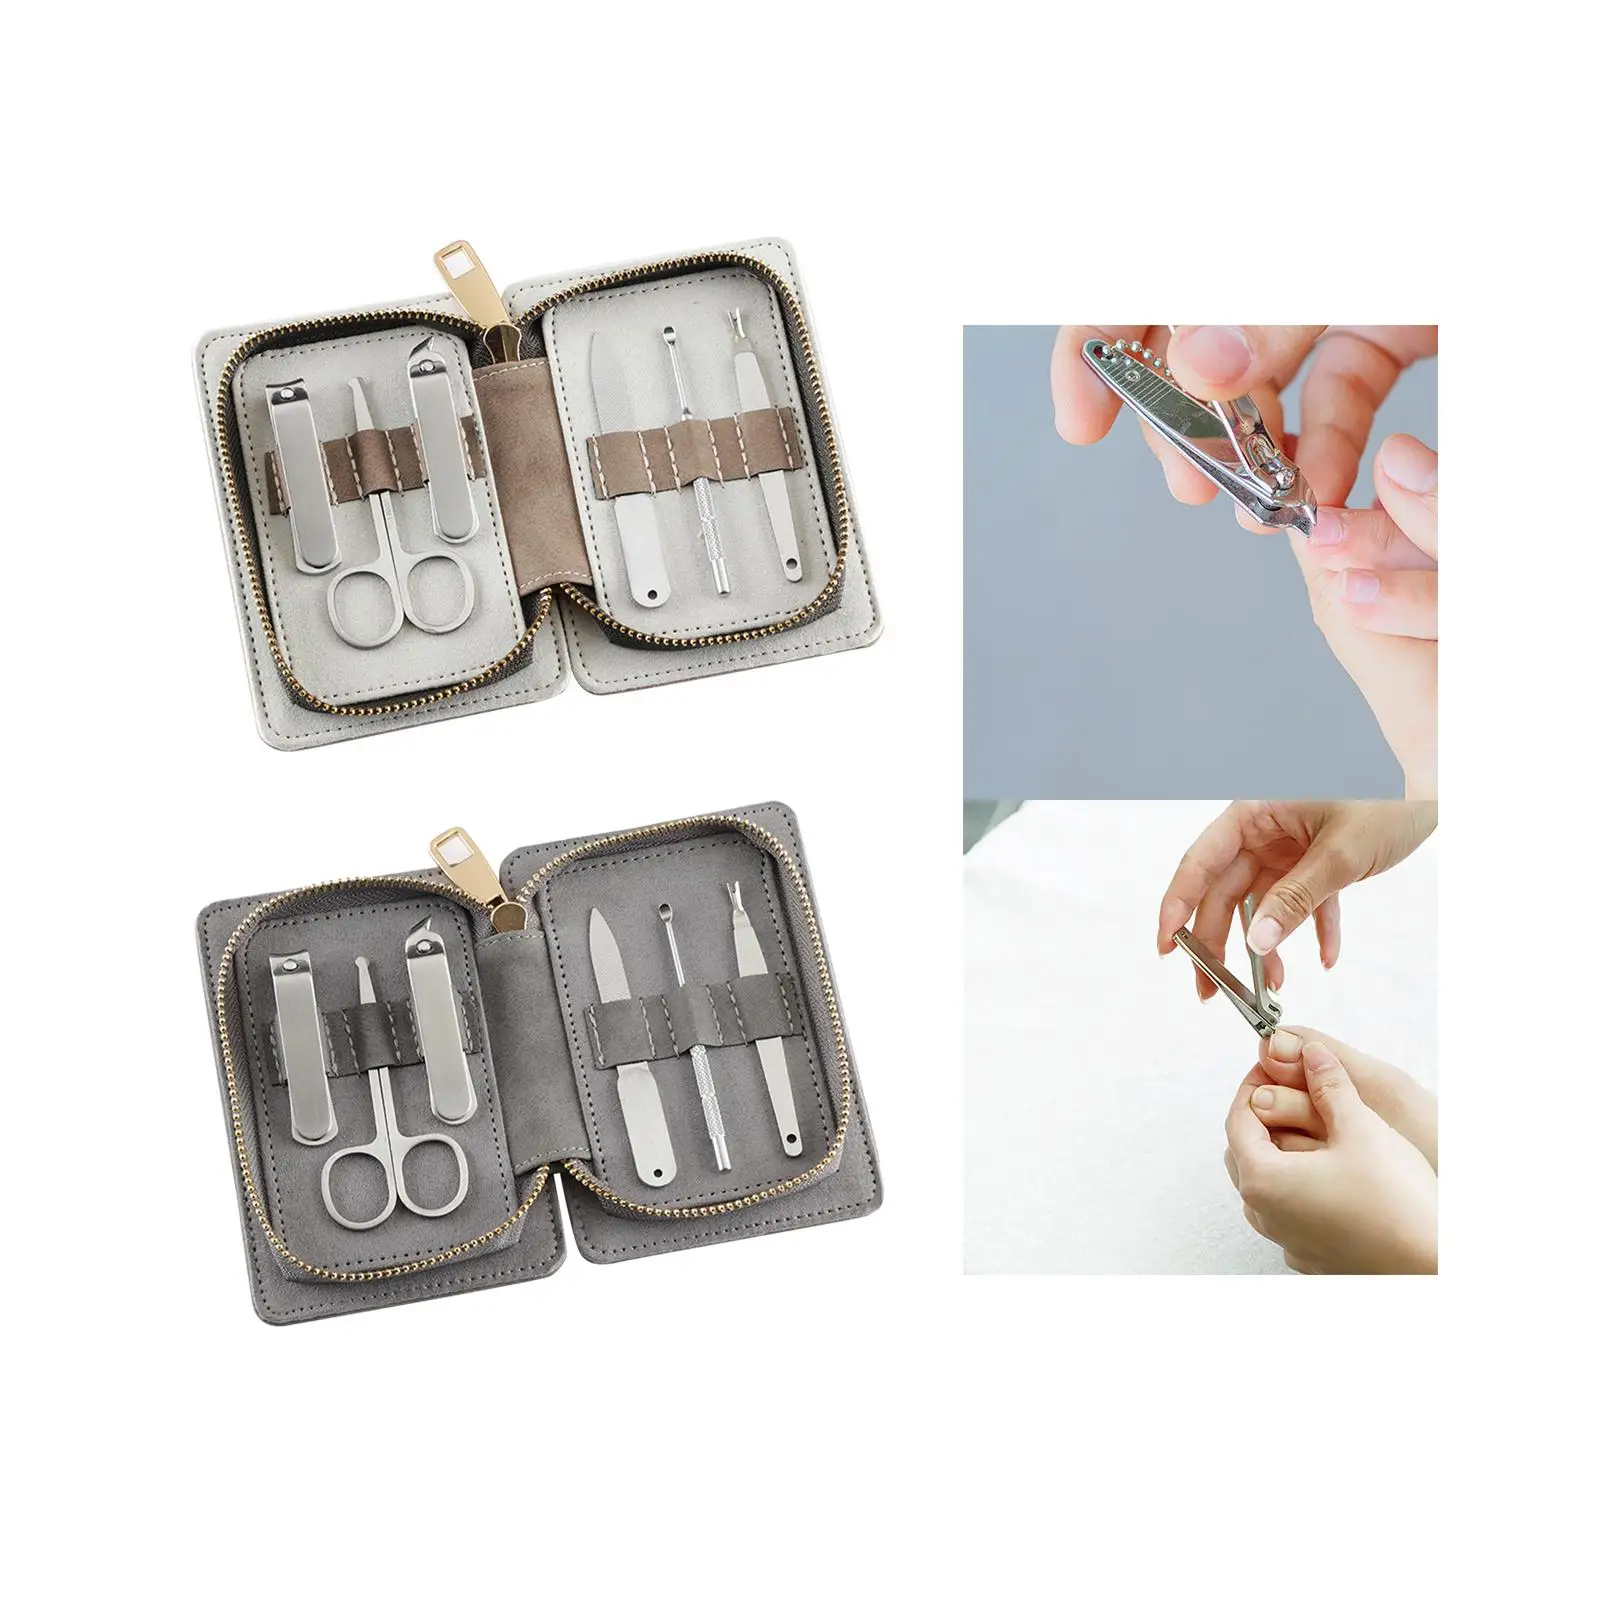 6 Pieces Portable Manicure Set Nail Care Tools Stainless Steel with PU Leather Case 6 in 1 Nail Clippers Pedicure Kit for Home